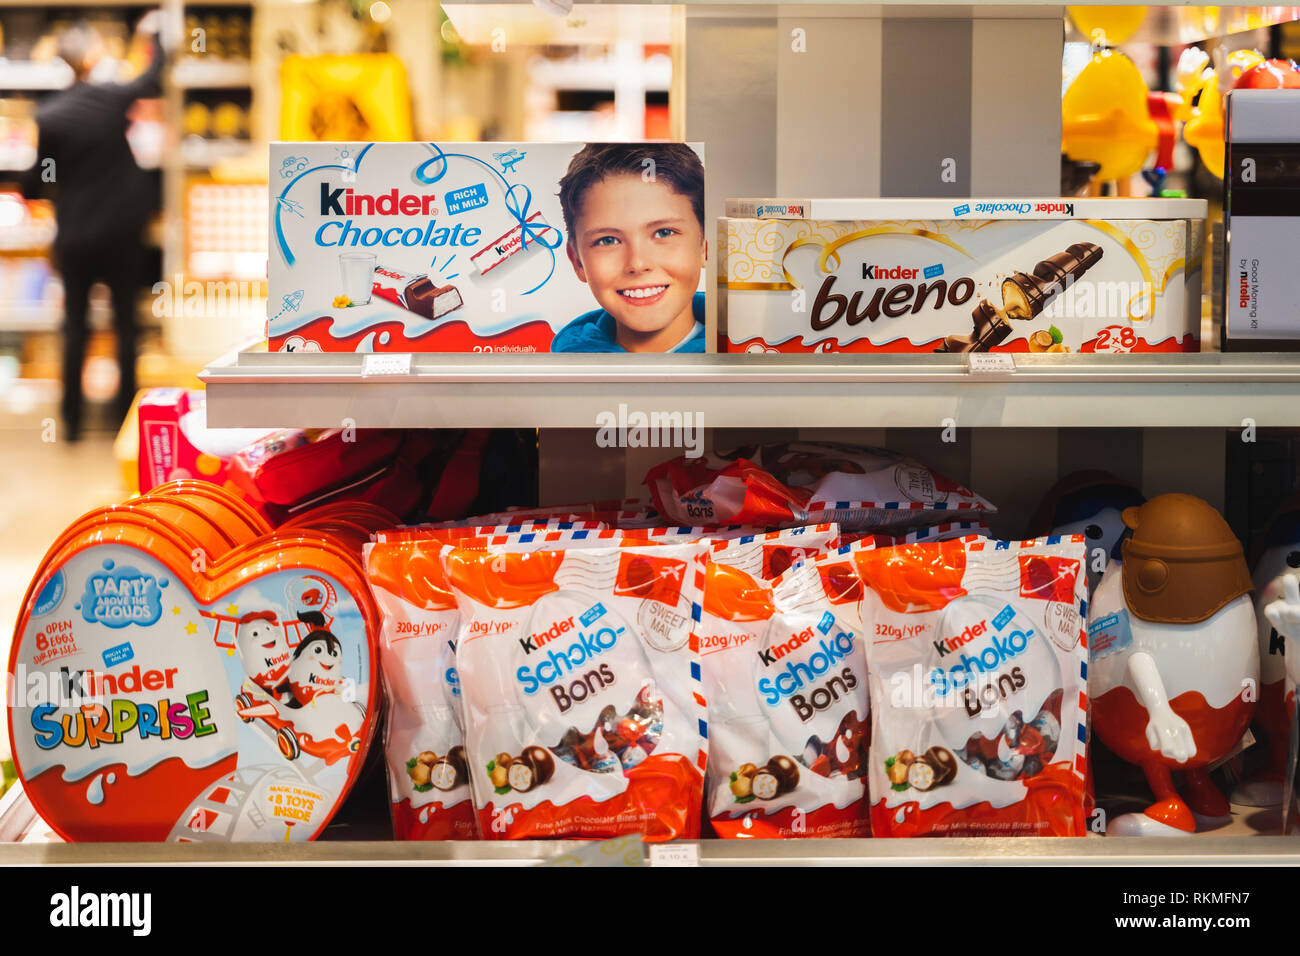 Kinder Bueno white chocolate is a confectionery product brand line of  Italian confectionery multinational manufacturer Ferrero 31236827 Stock  Photo at Vecteezy